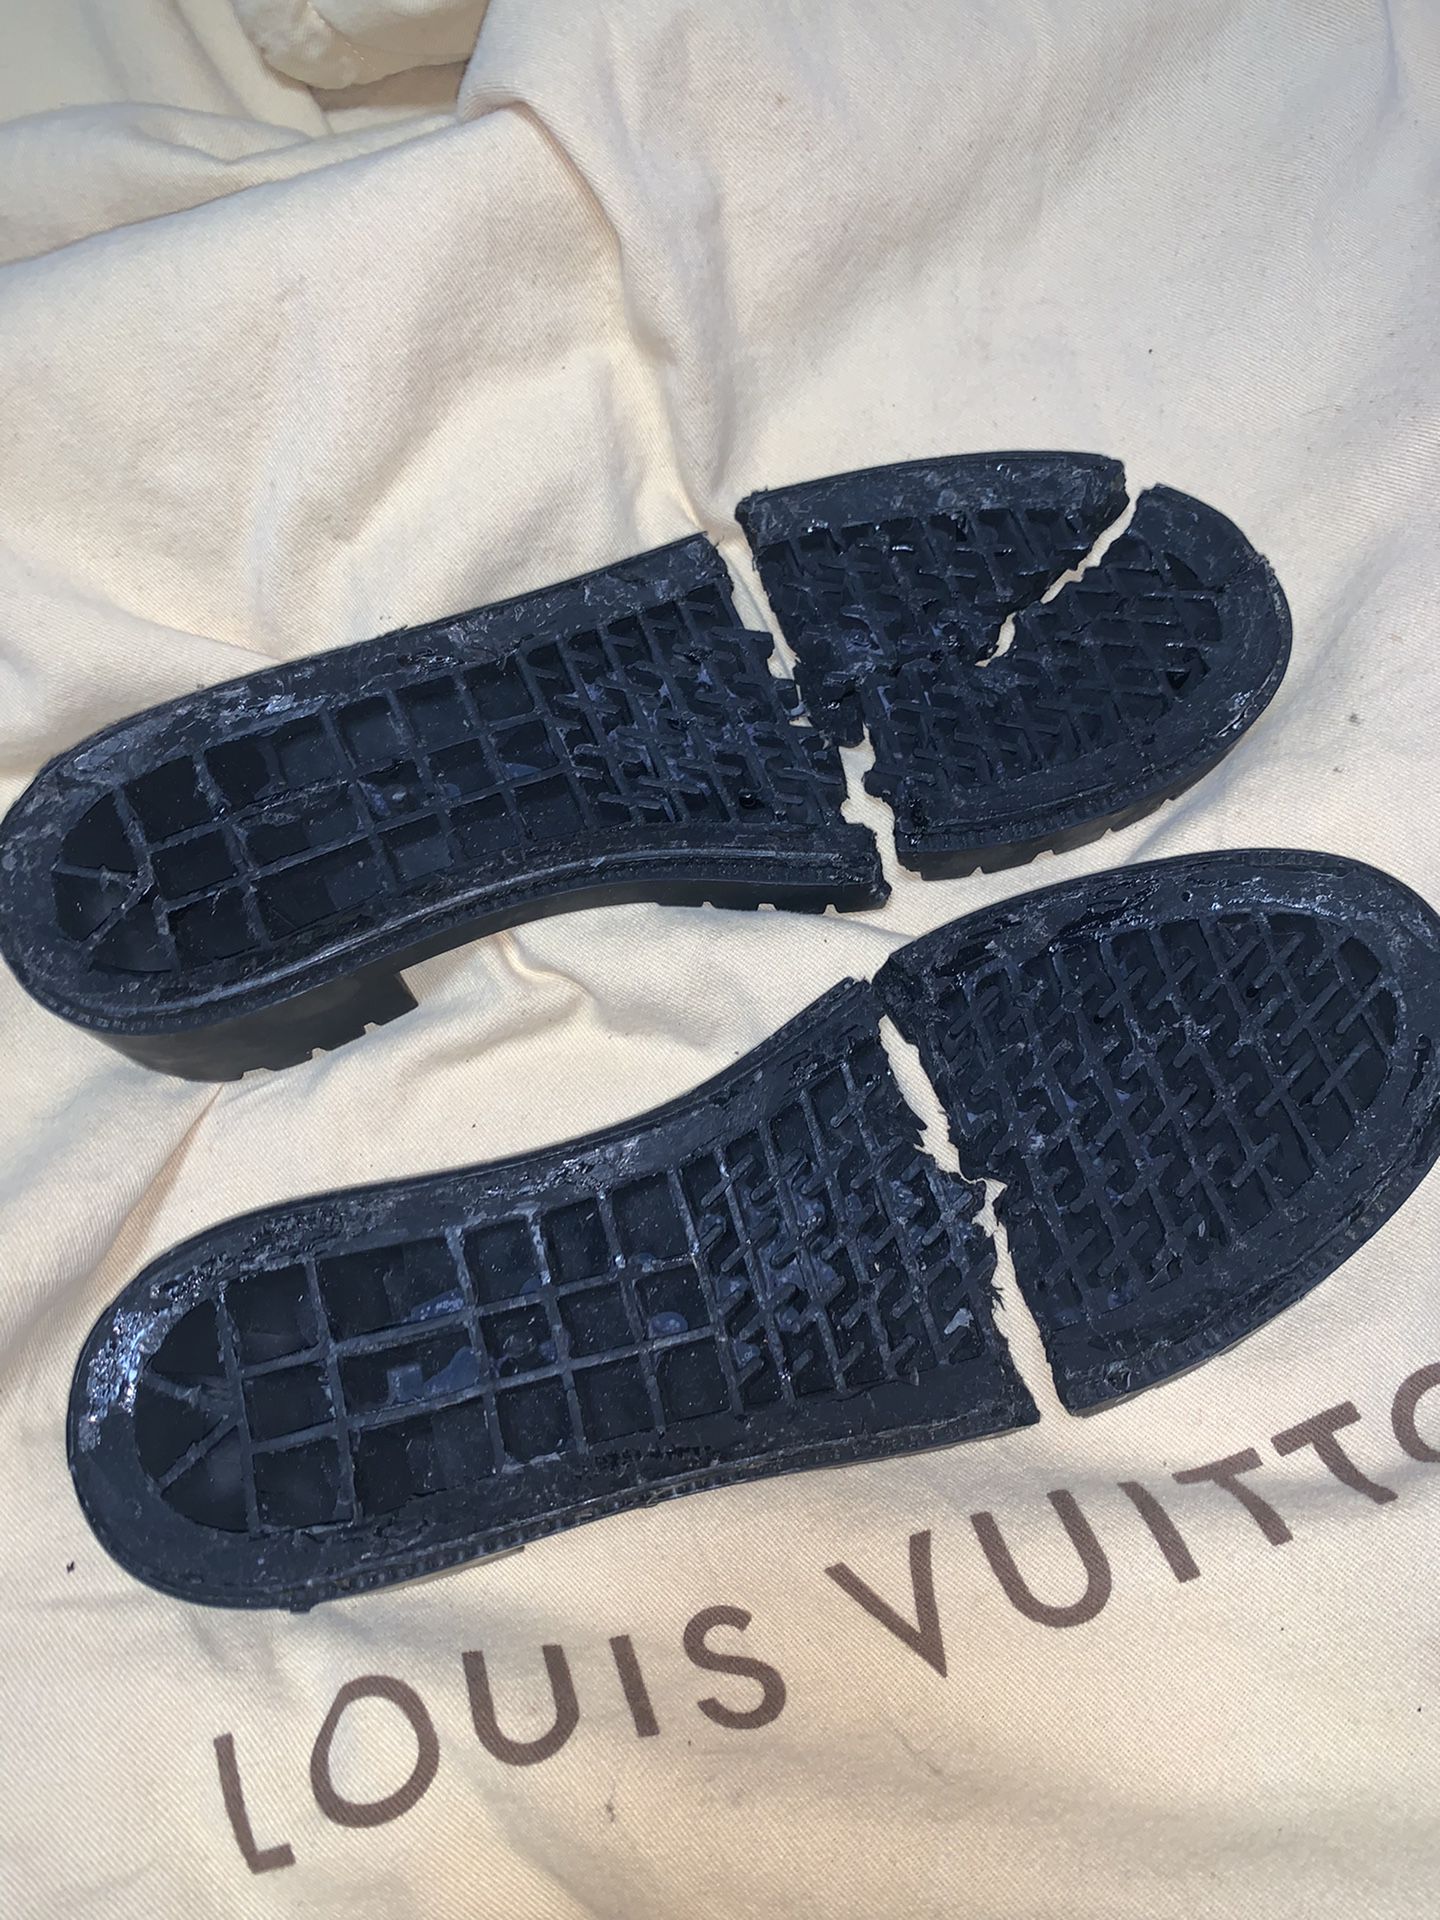 LV Rainboots needs Sole Replaced 